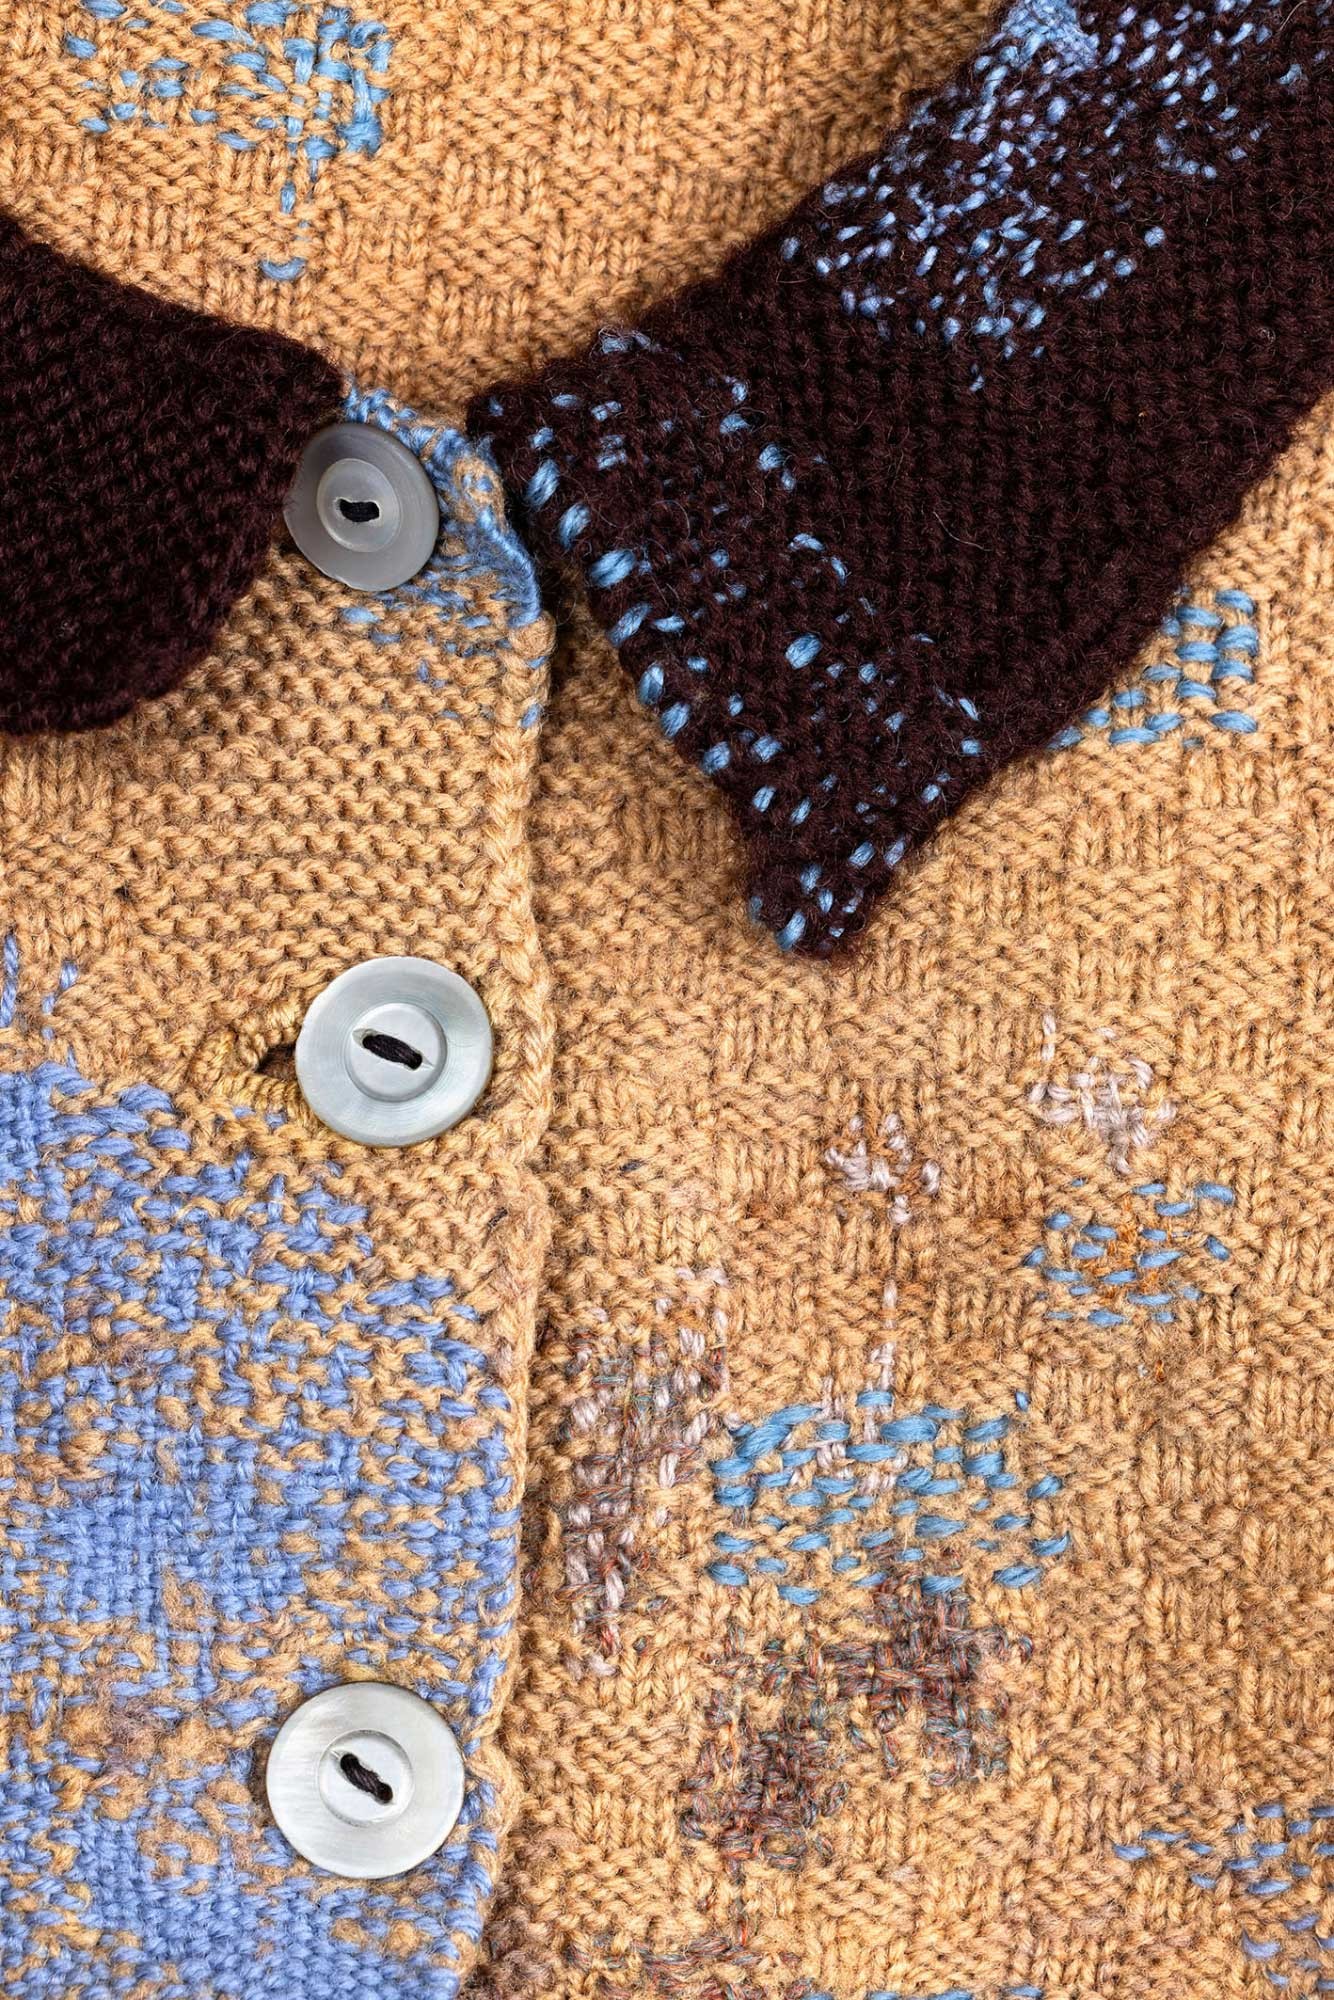 Original hand-knit damaged cardigan mended with various blue wools